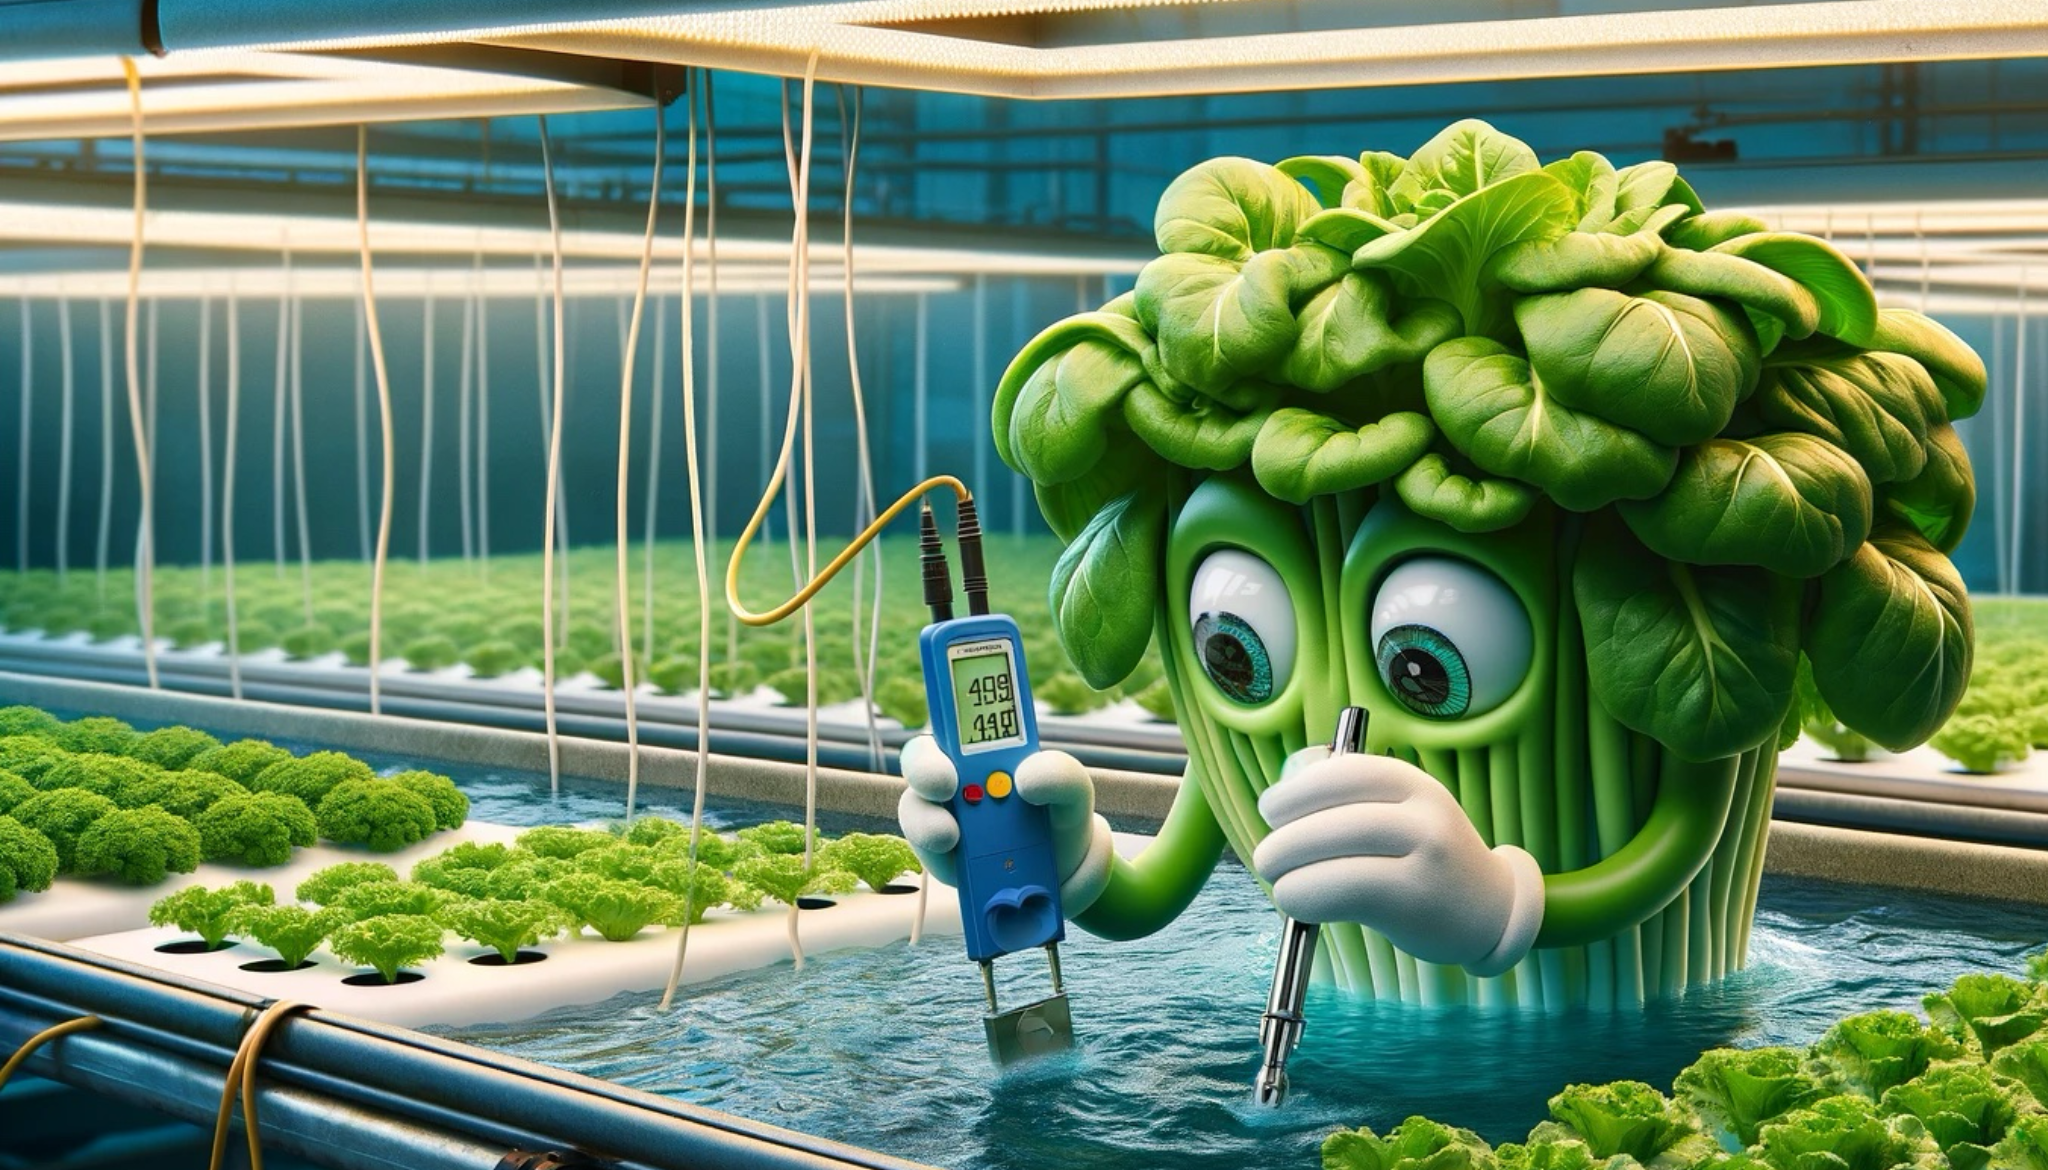 lettuce learning how to read ec meter in hydroponic system